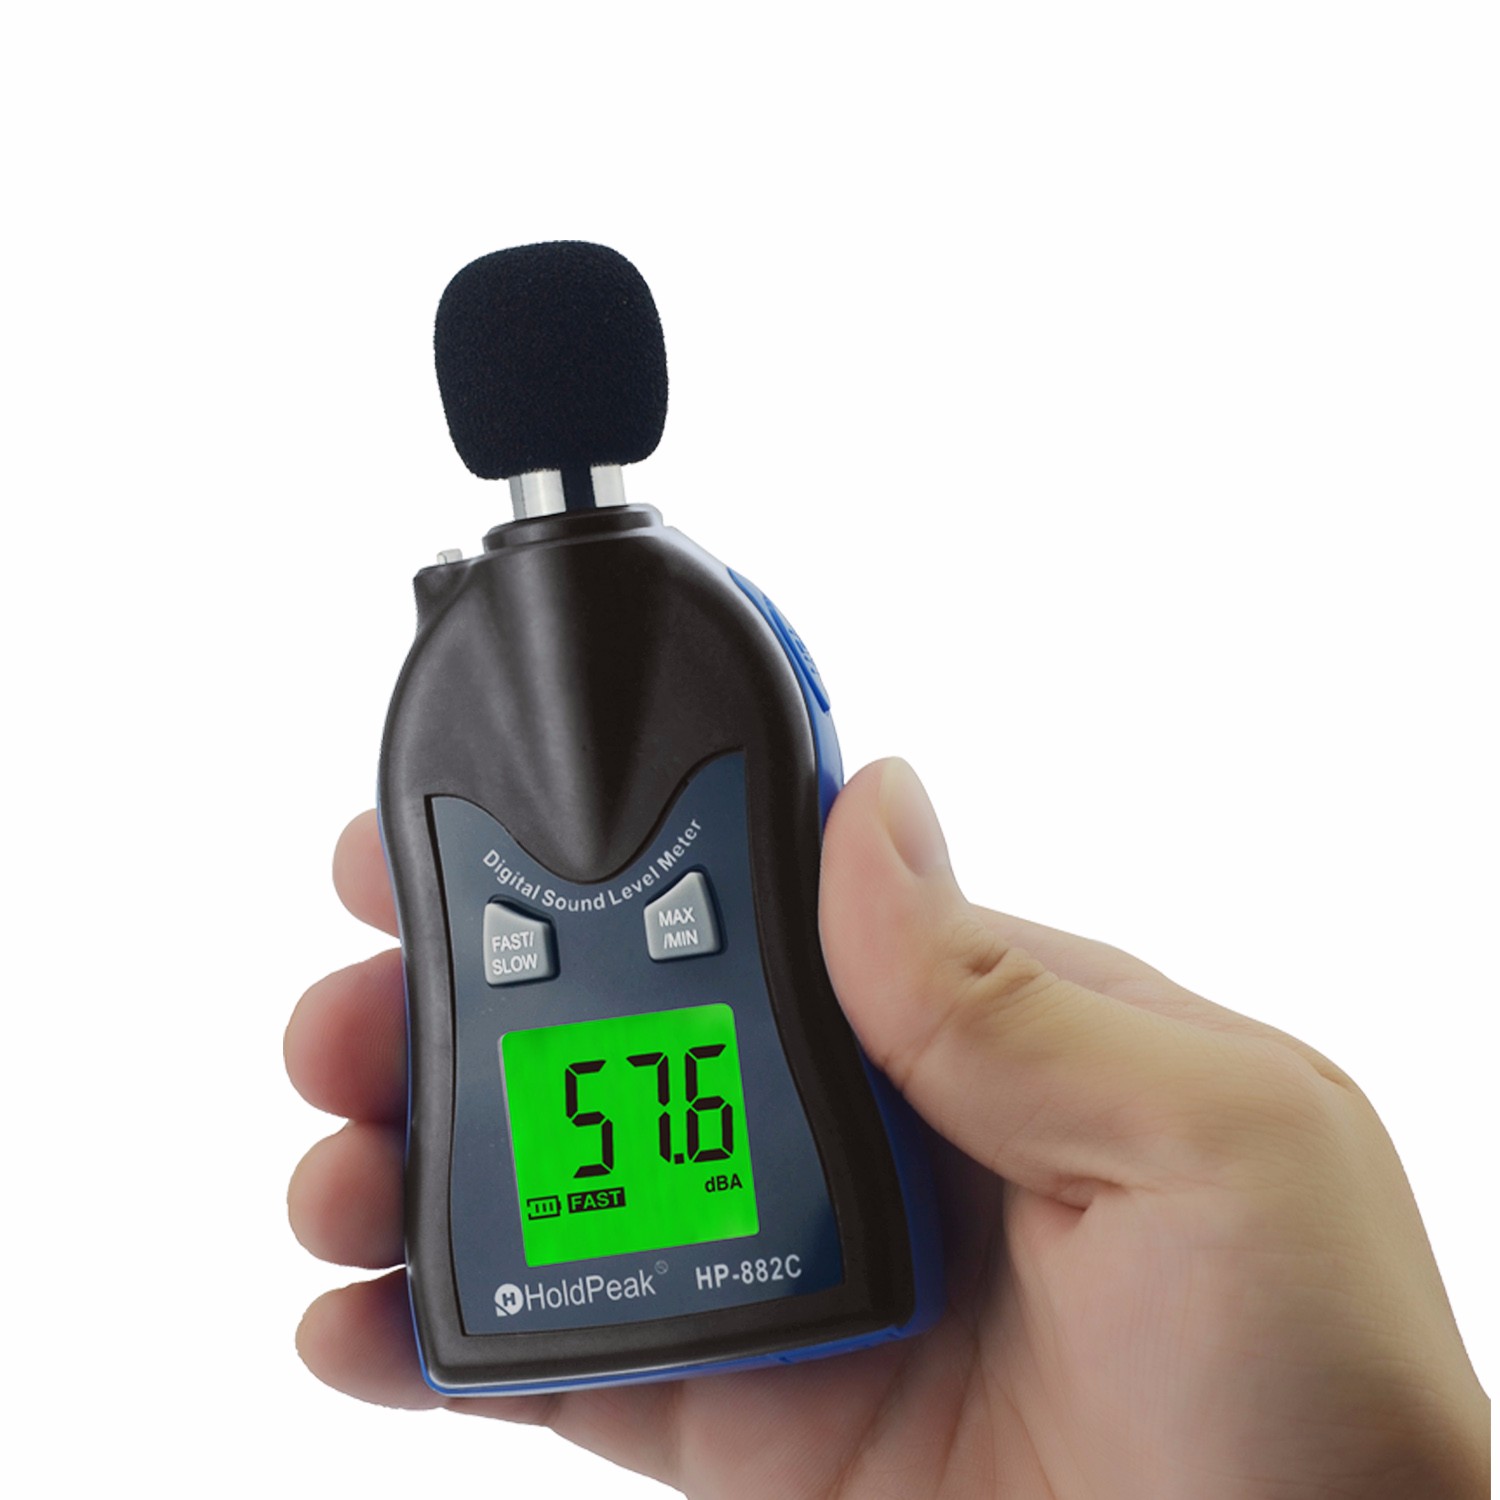 HoldPeak hot sale voice decibel meter Suppliers for measuring steady state noise